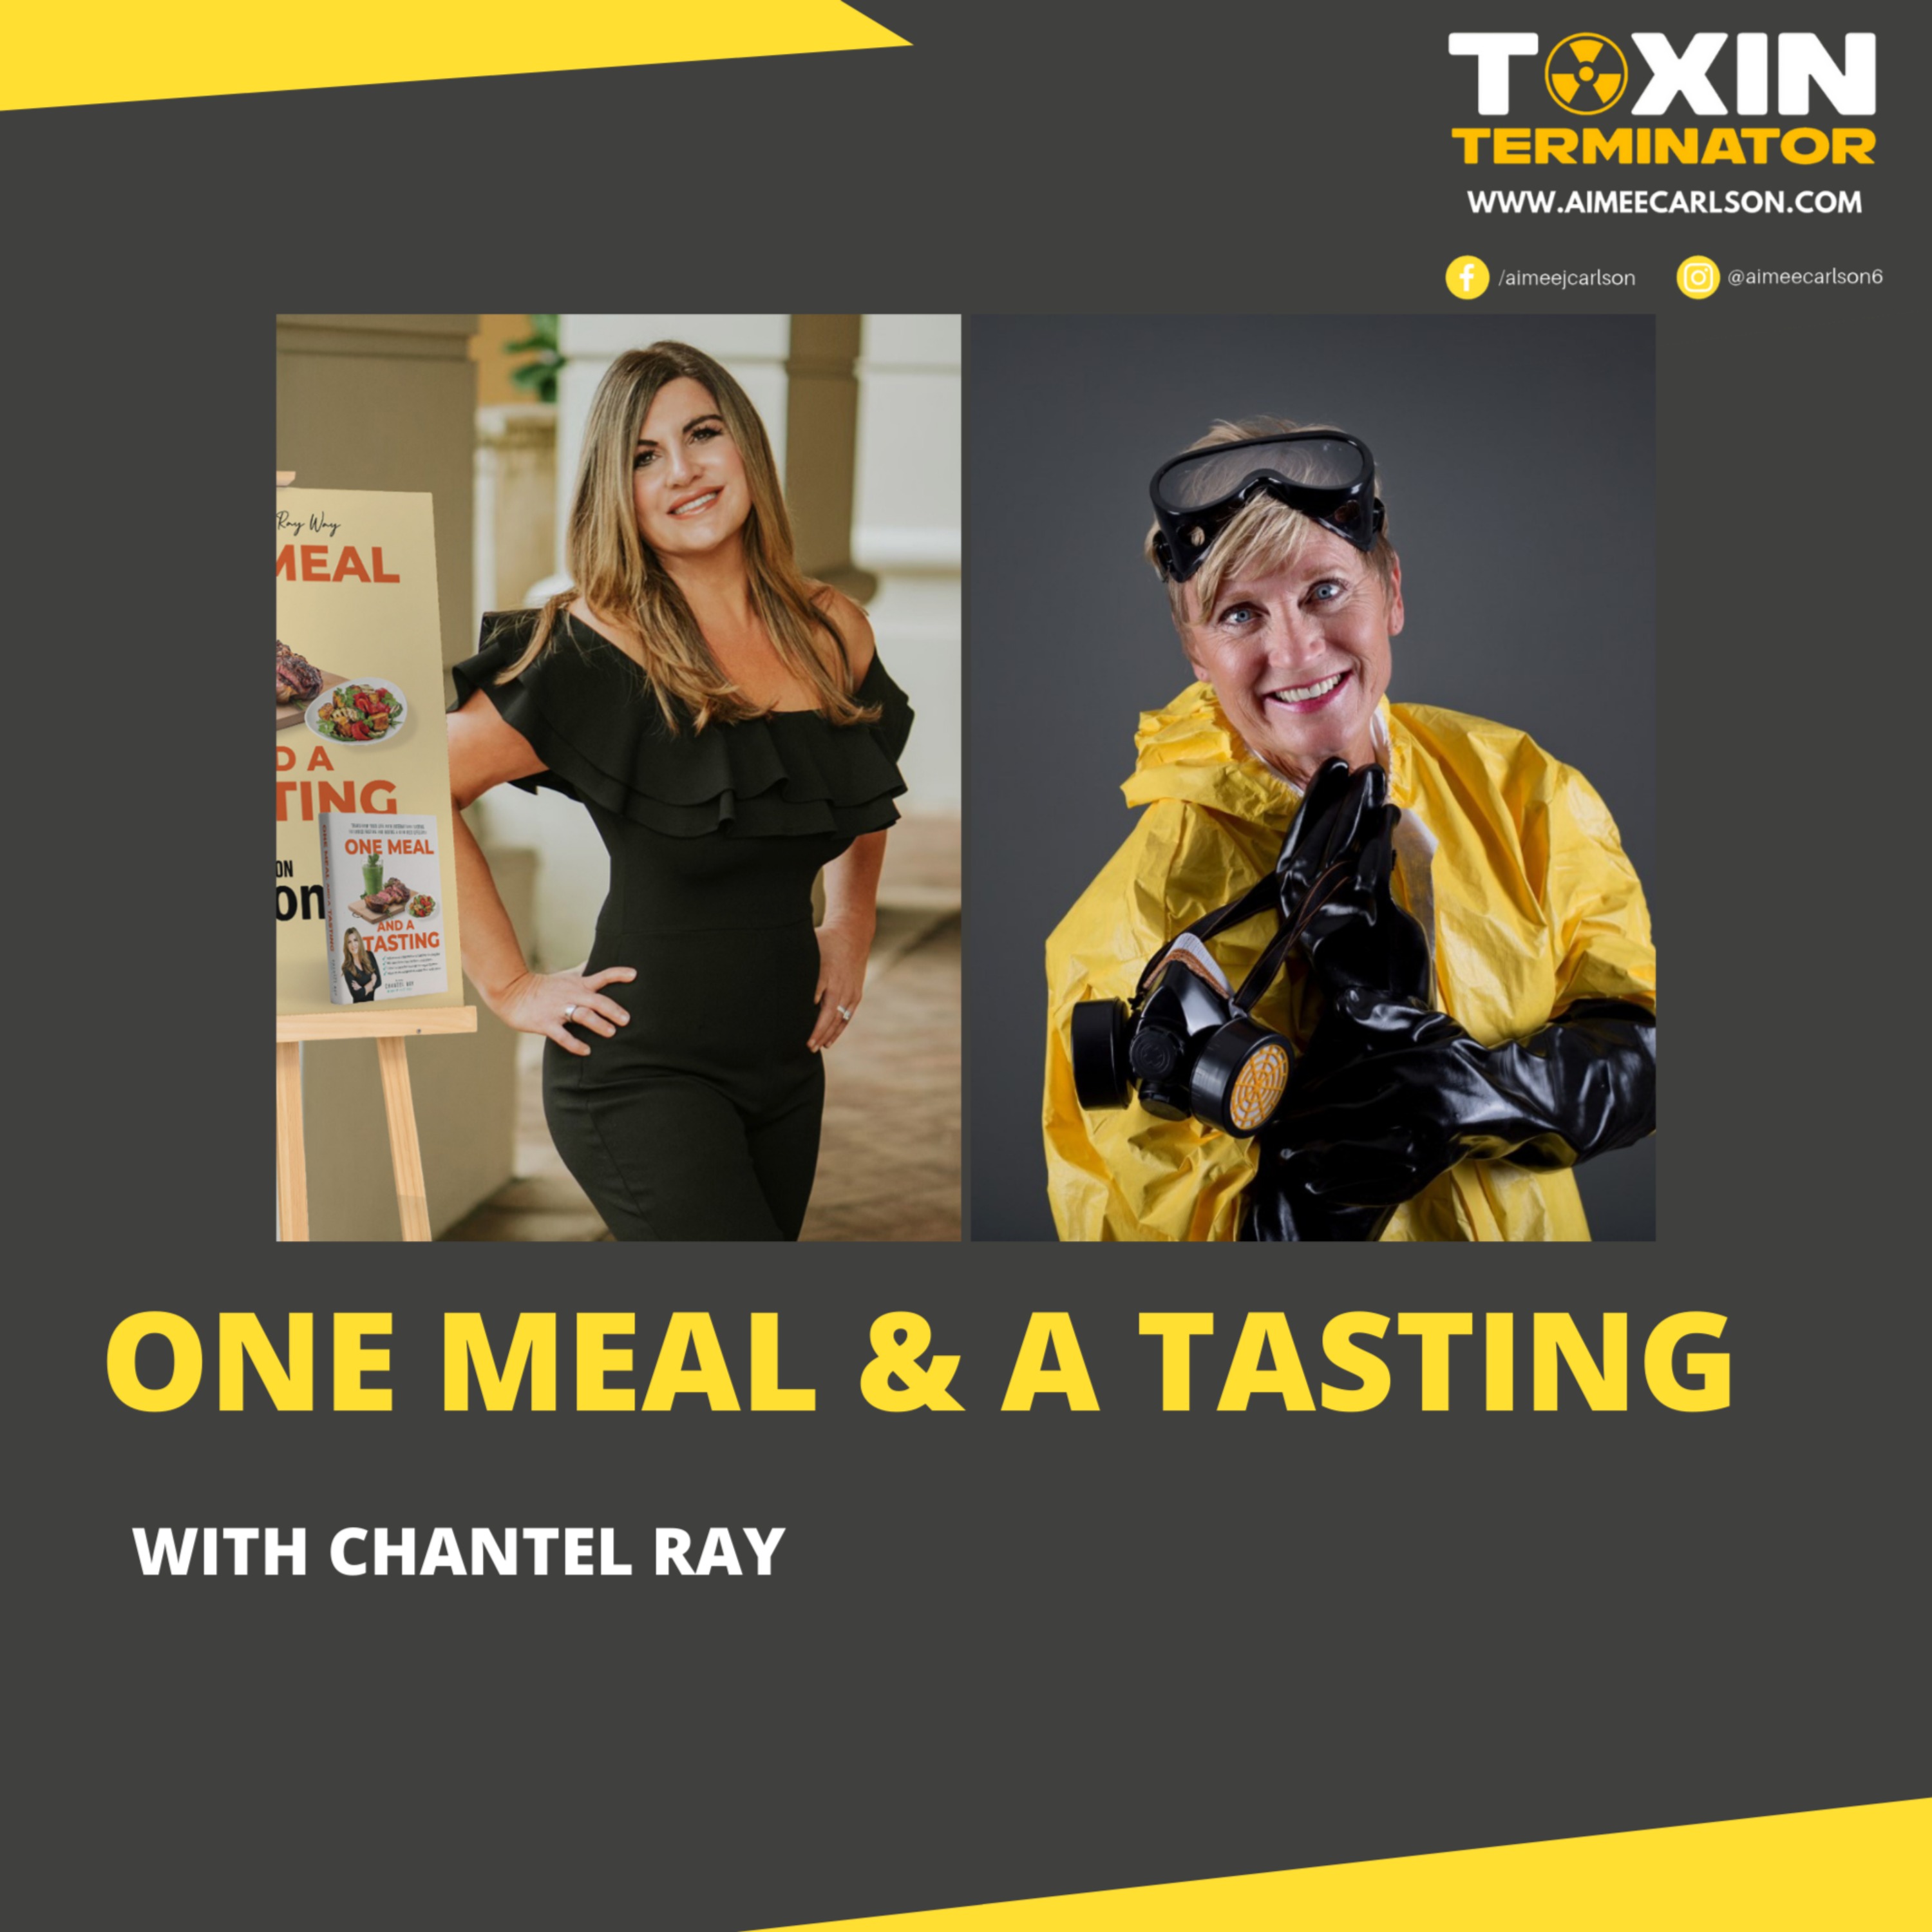 One Meal & A Tasting with Chantel Ray